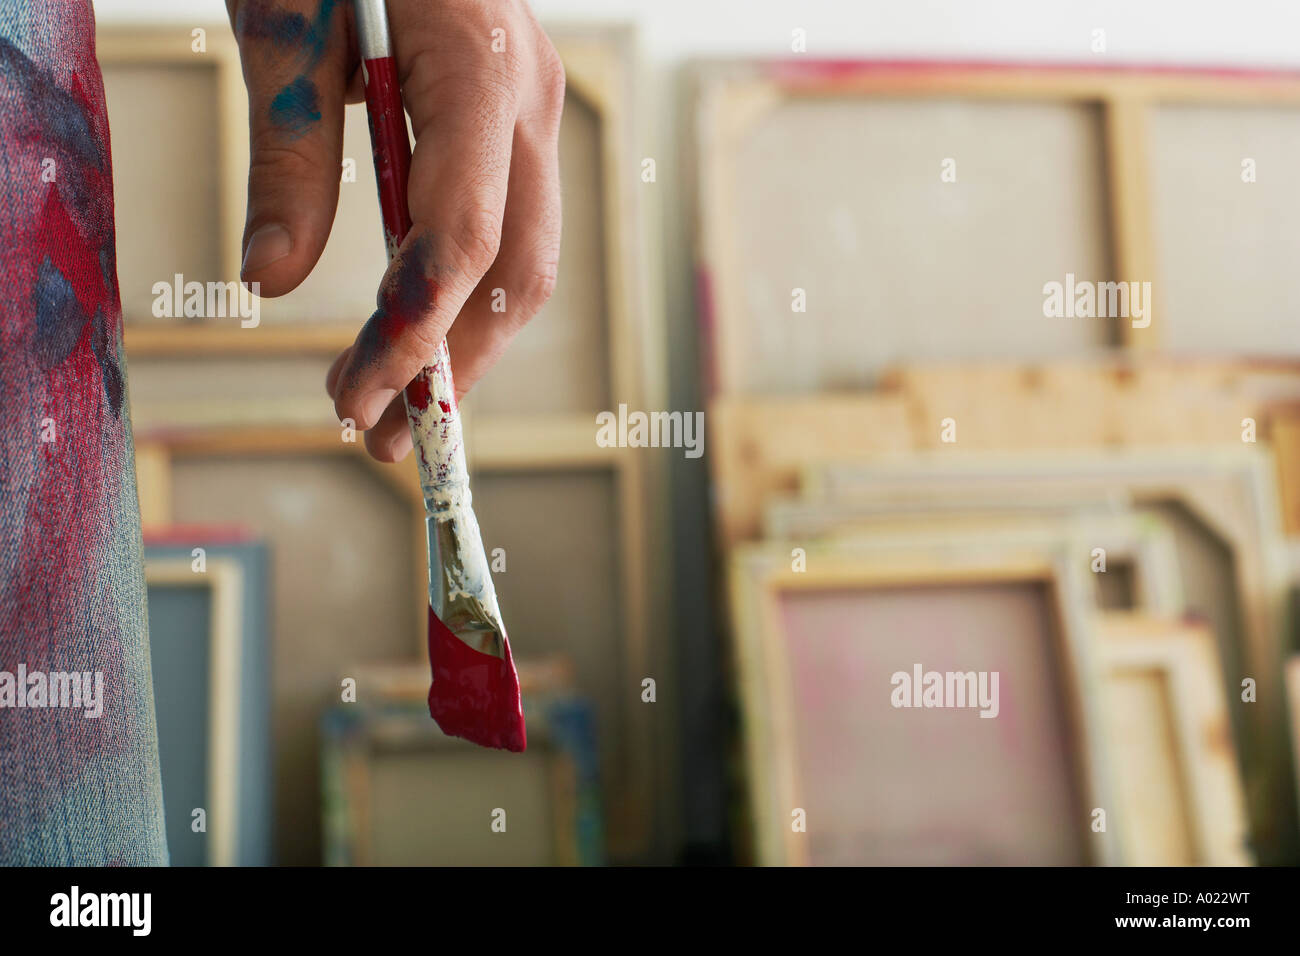 Artist holding paint brush, standing in studio, close up on hand Stock Photo